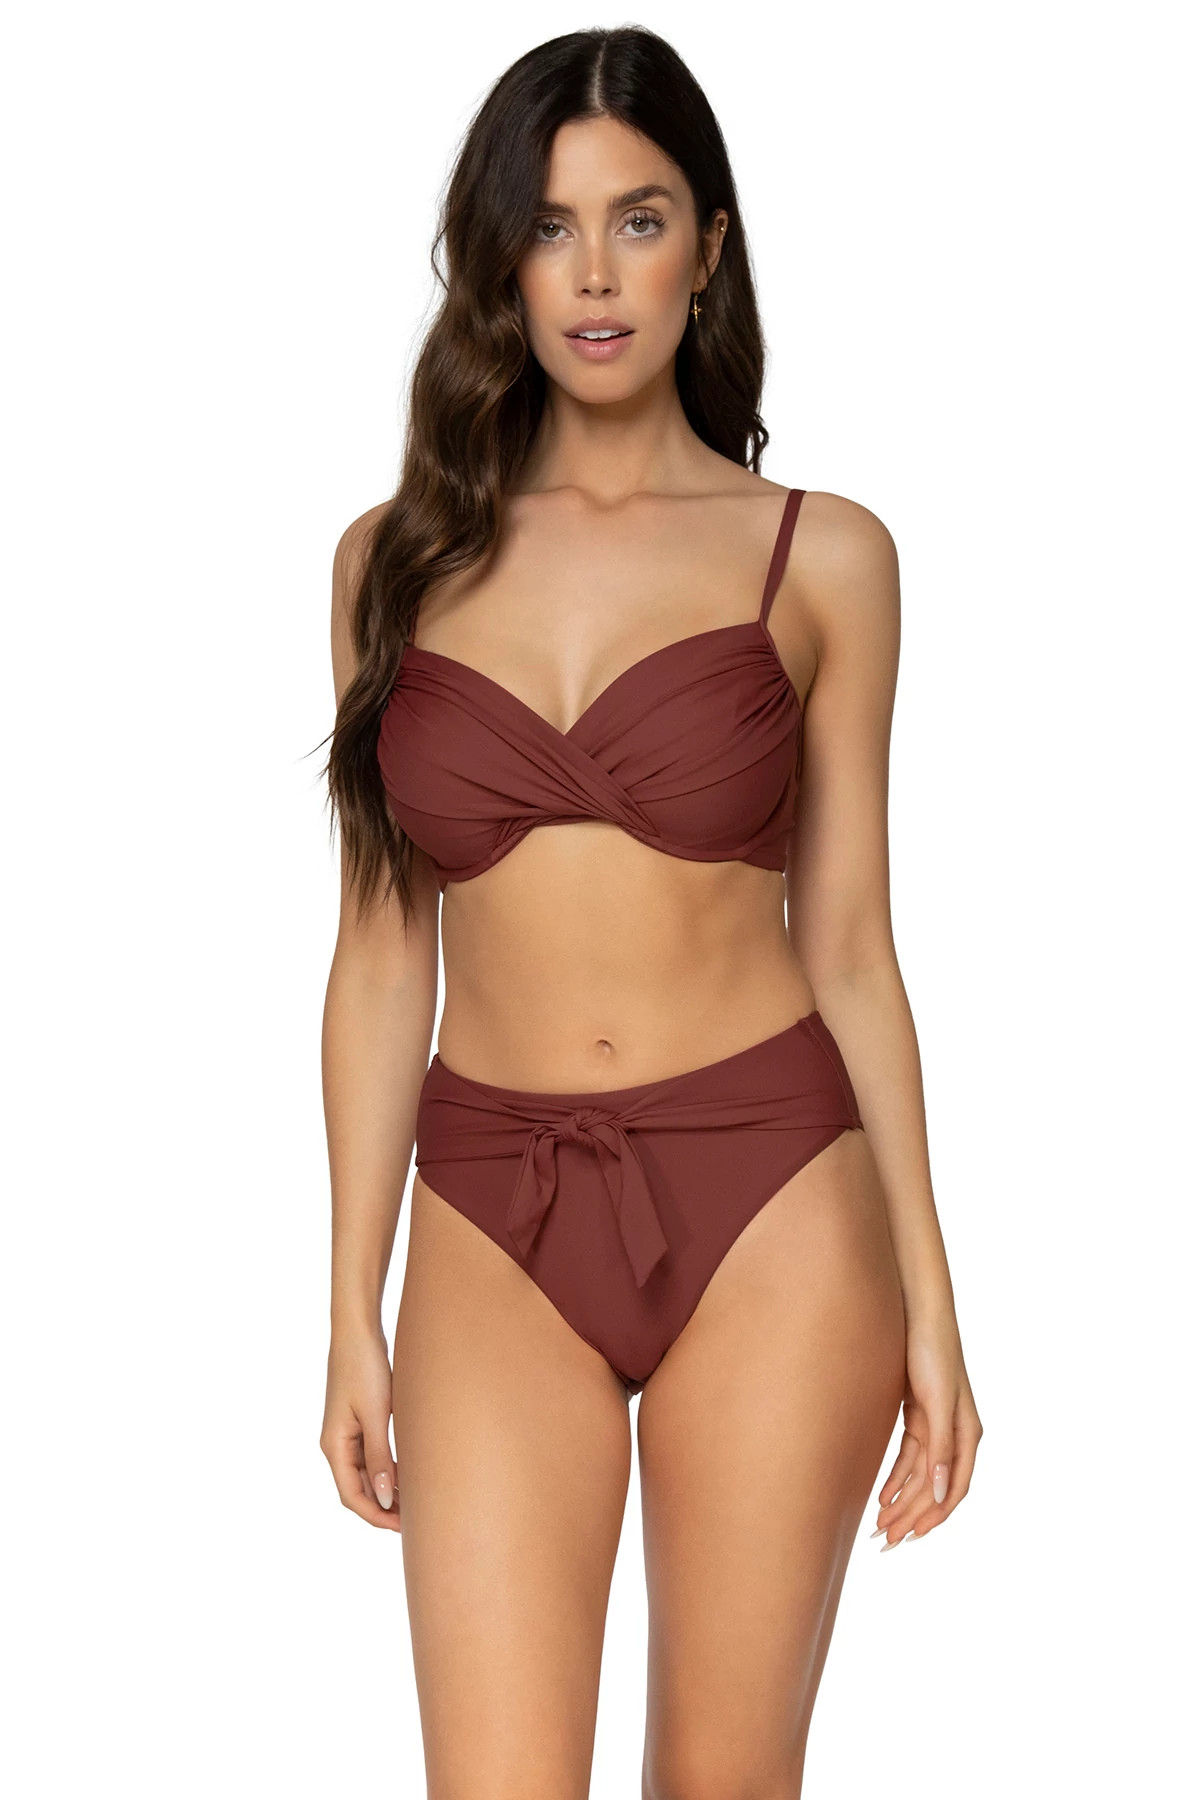 TUSCAN RED Crossroads Underwire Bikini Top (D+ Cup) image number 1